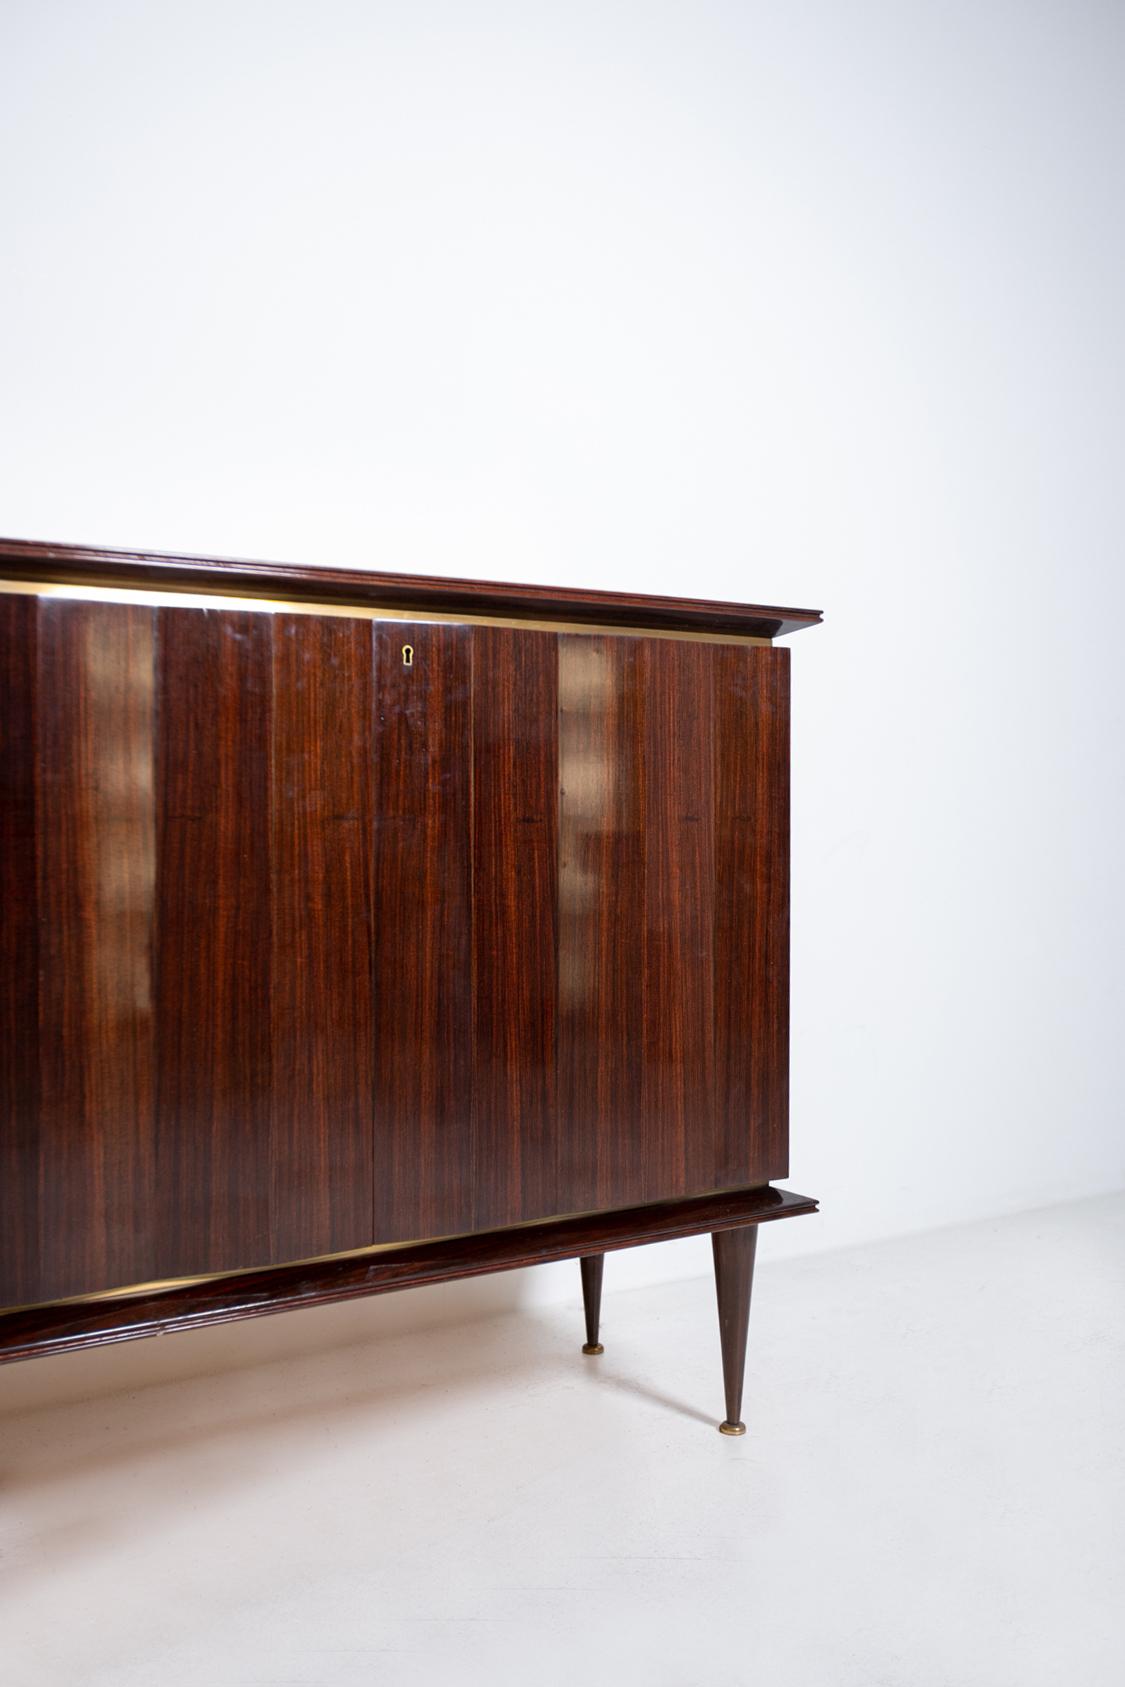 Mid-Century Modern Sideboard Bu Melchiorre Bega in in Precious Wood and Brass, 1950s